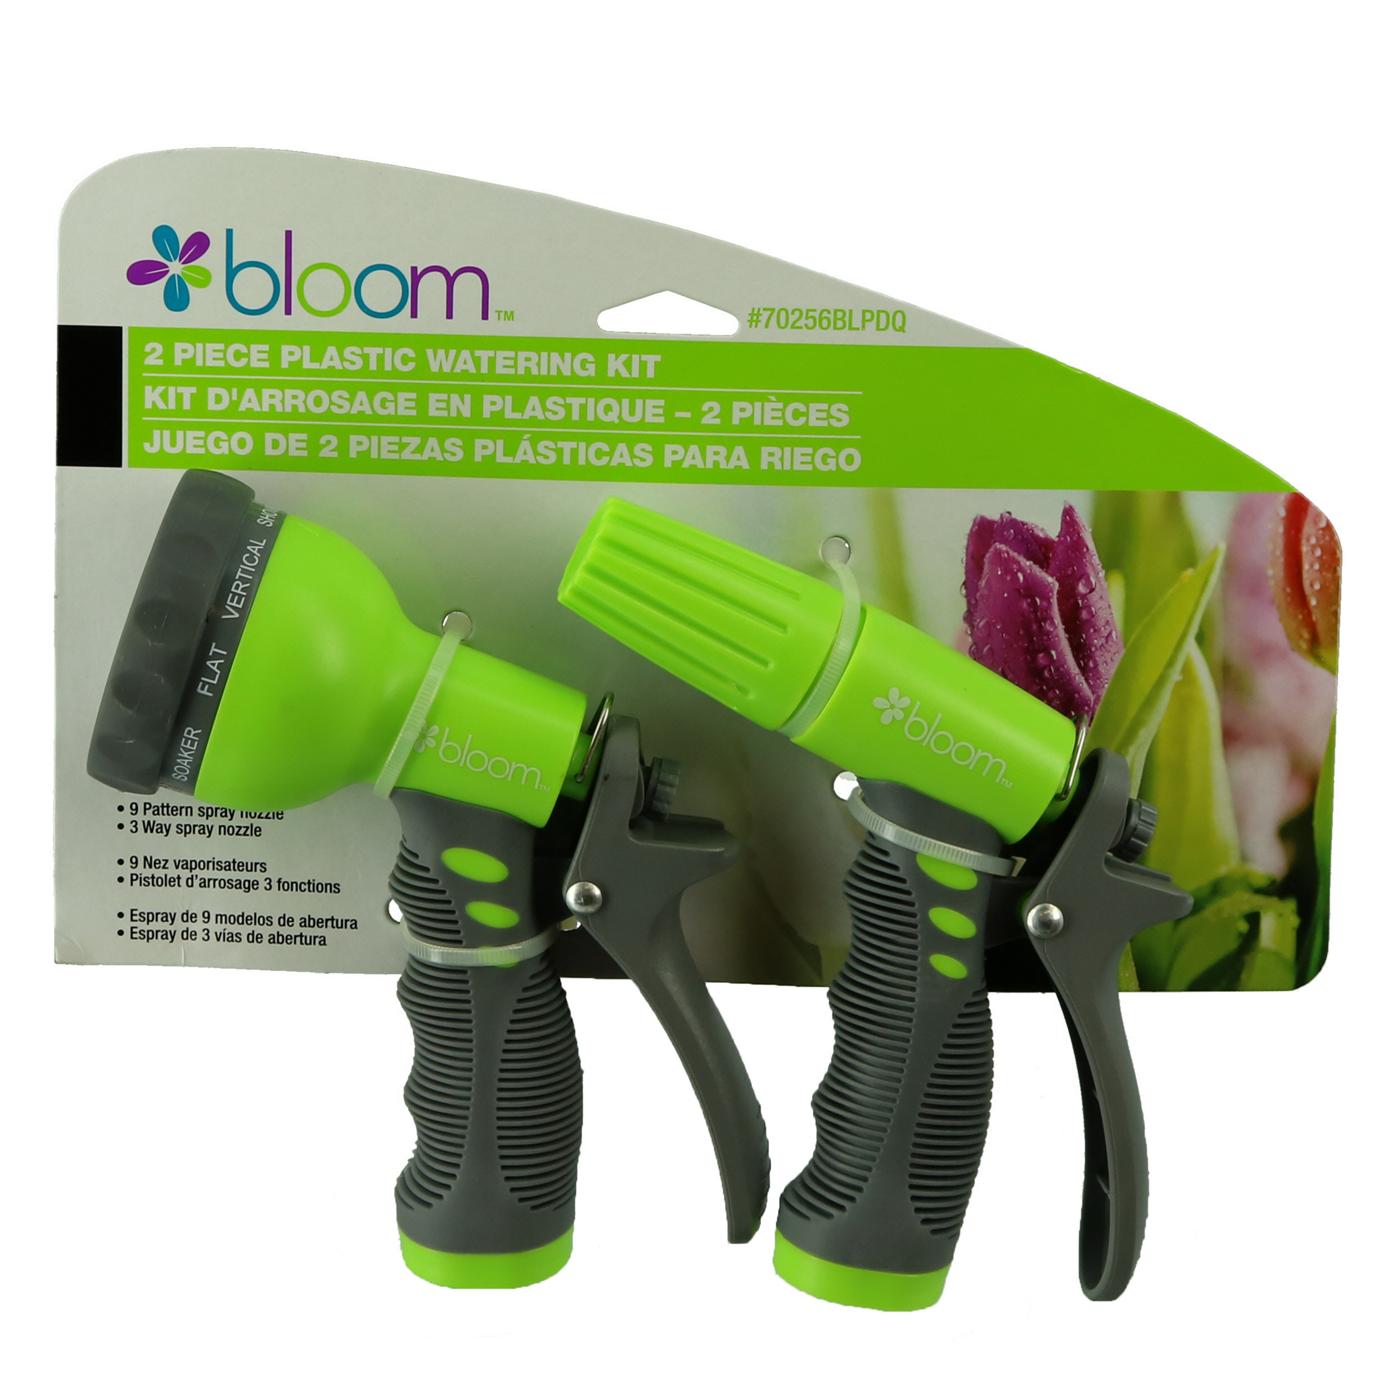 Bloom Plastic Watering Nozzle Kit, Colors May Vary; image 3 of 3